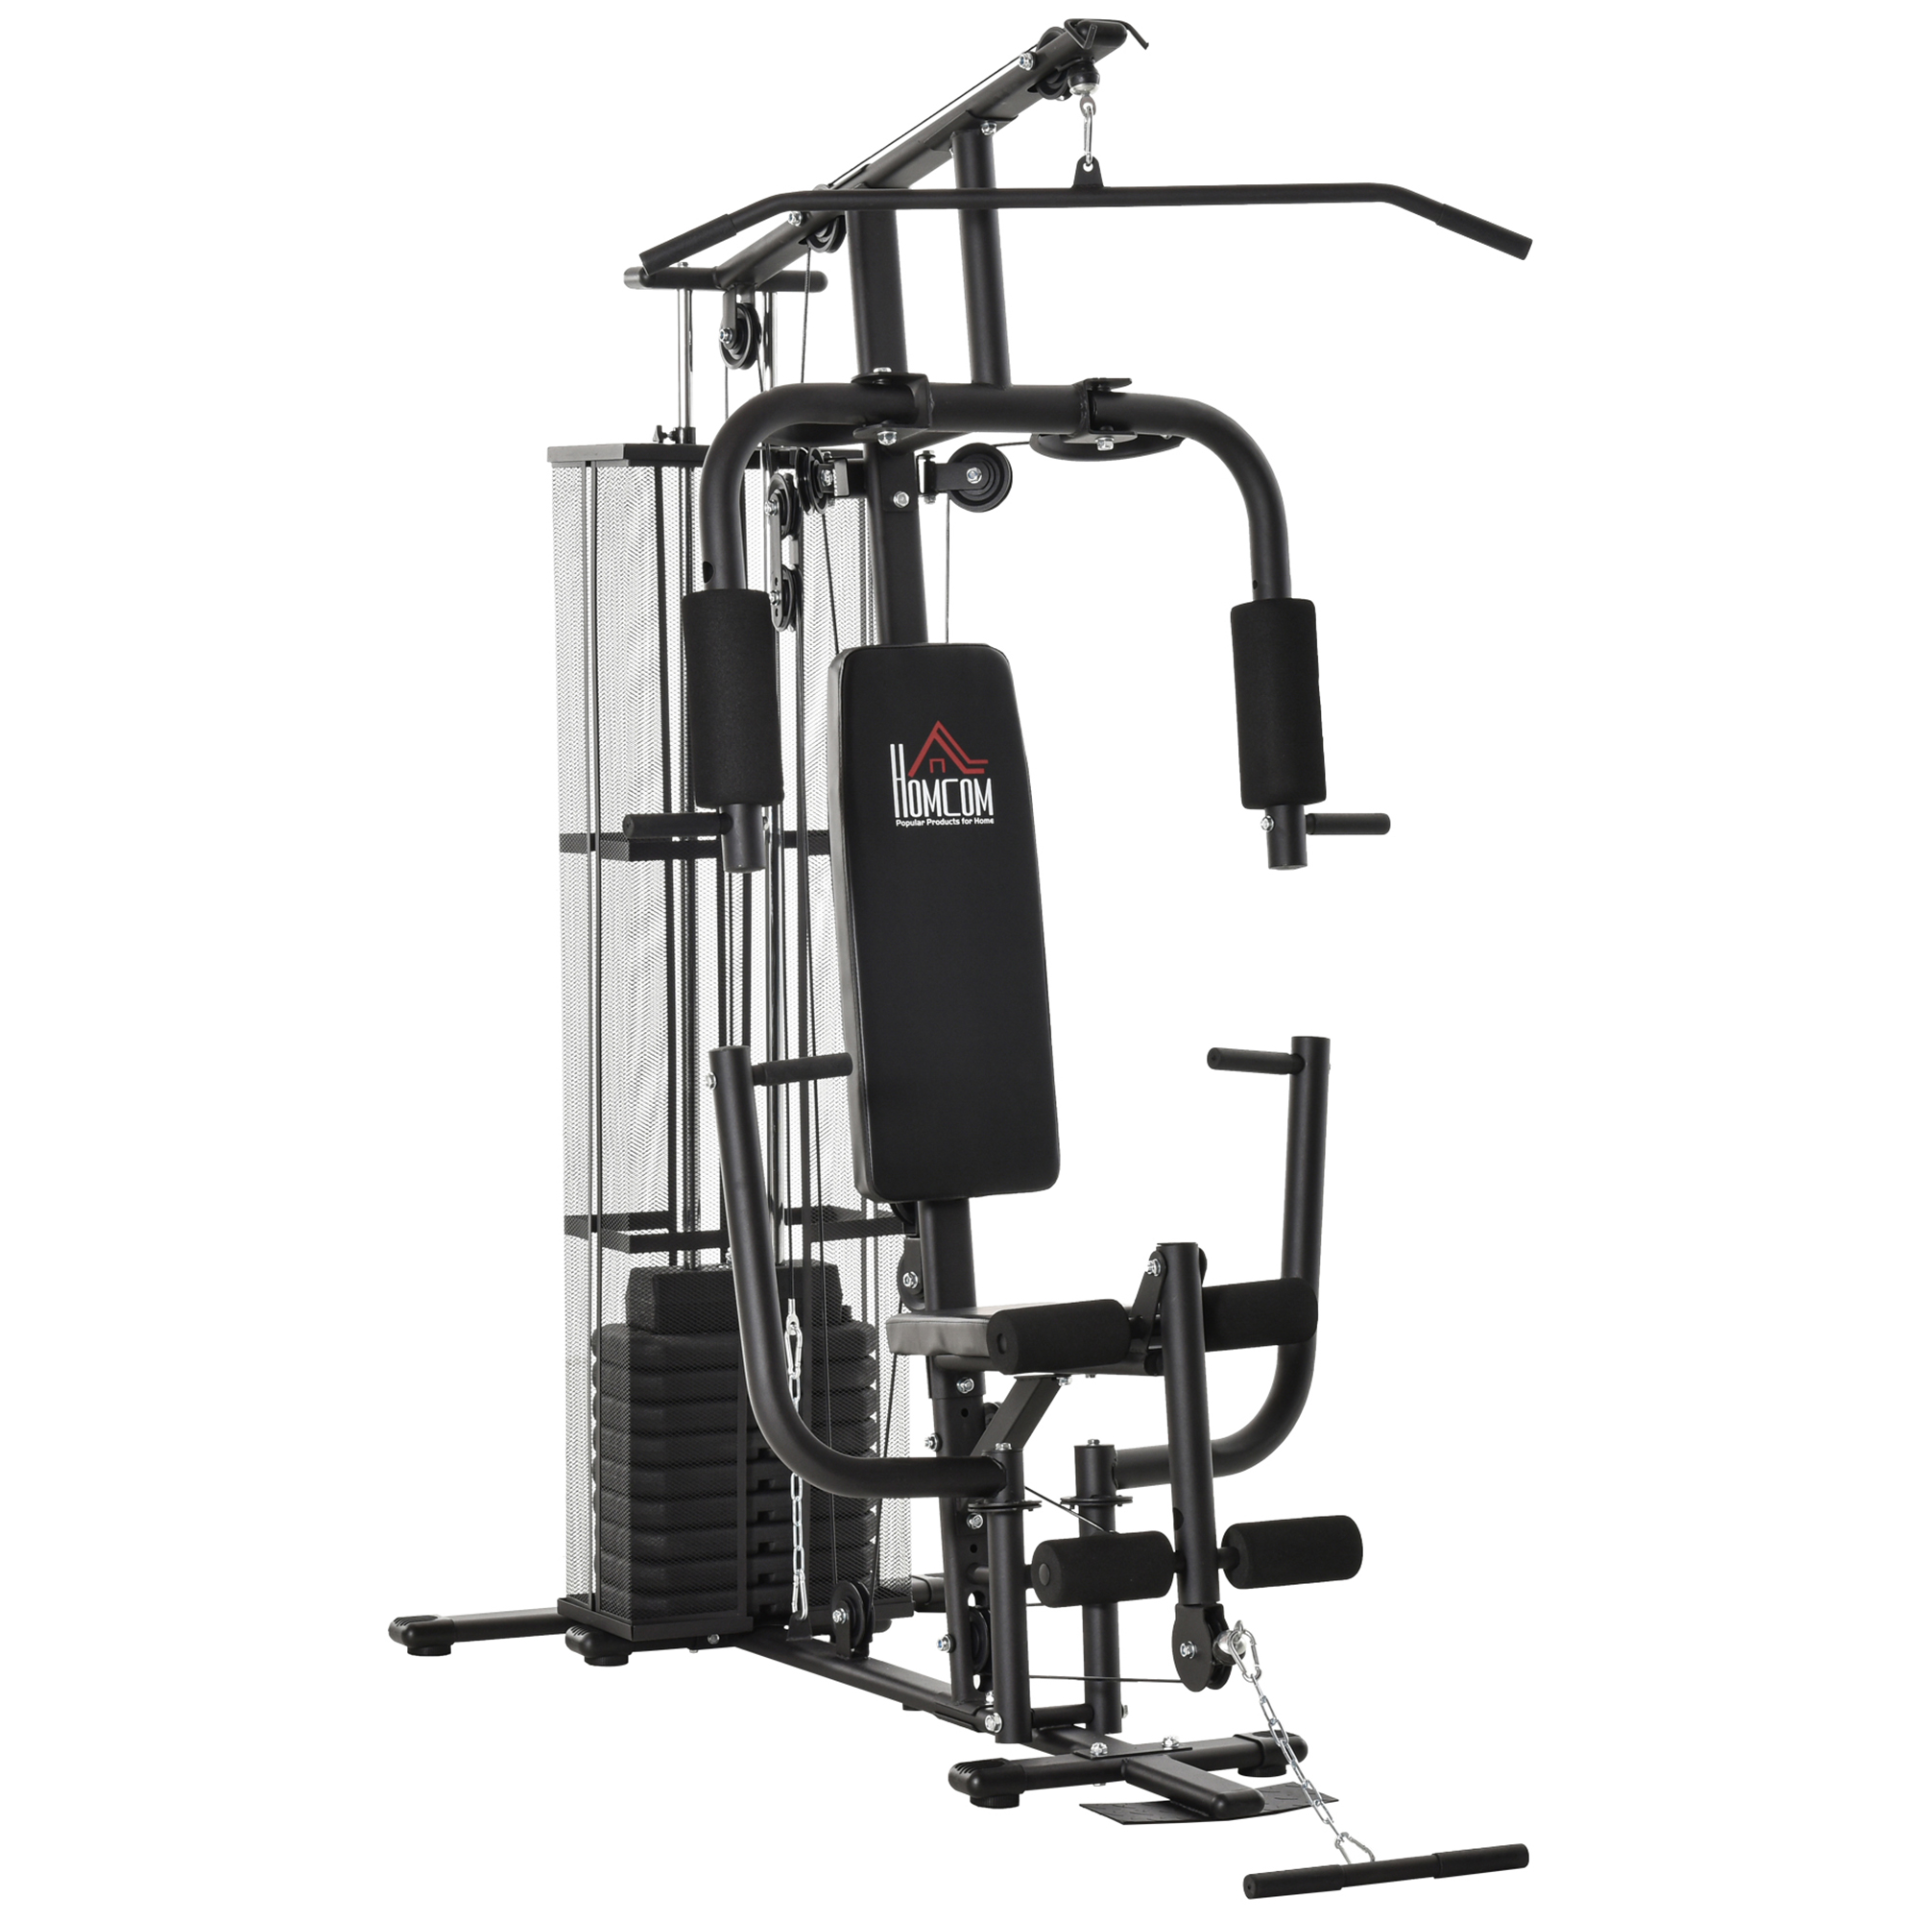 Multi-Exercise Gym Workout Station 45Kg Weight Stack Training System Full Body